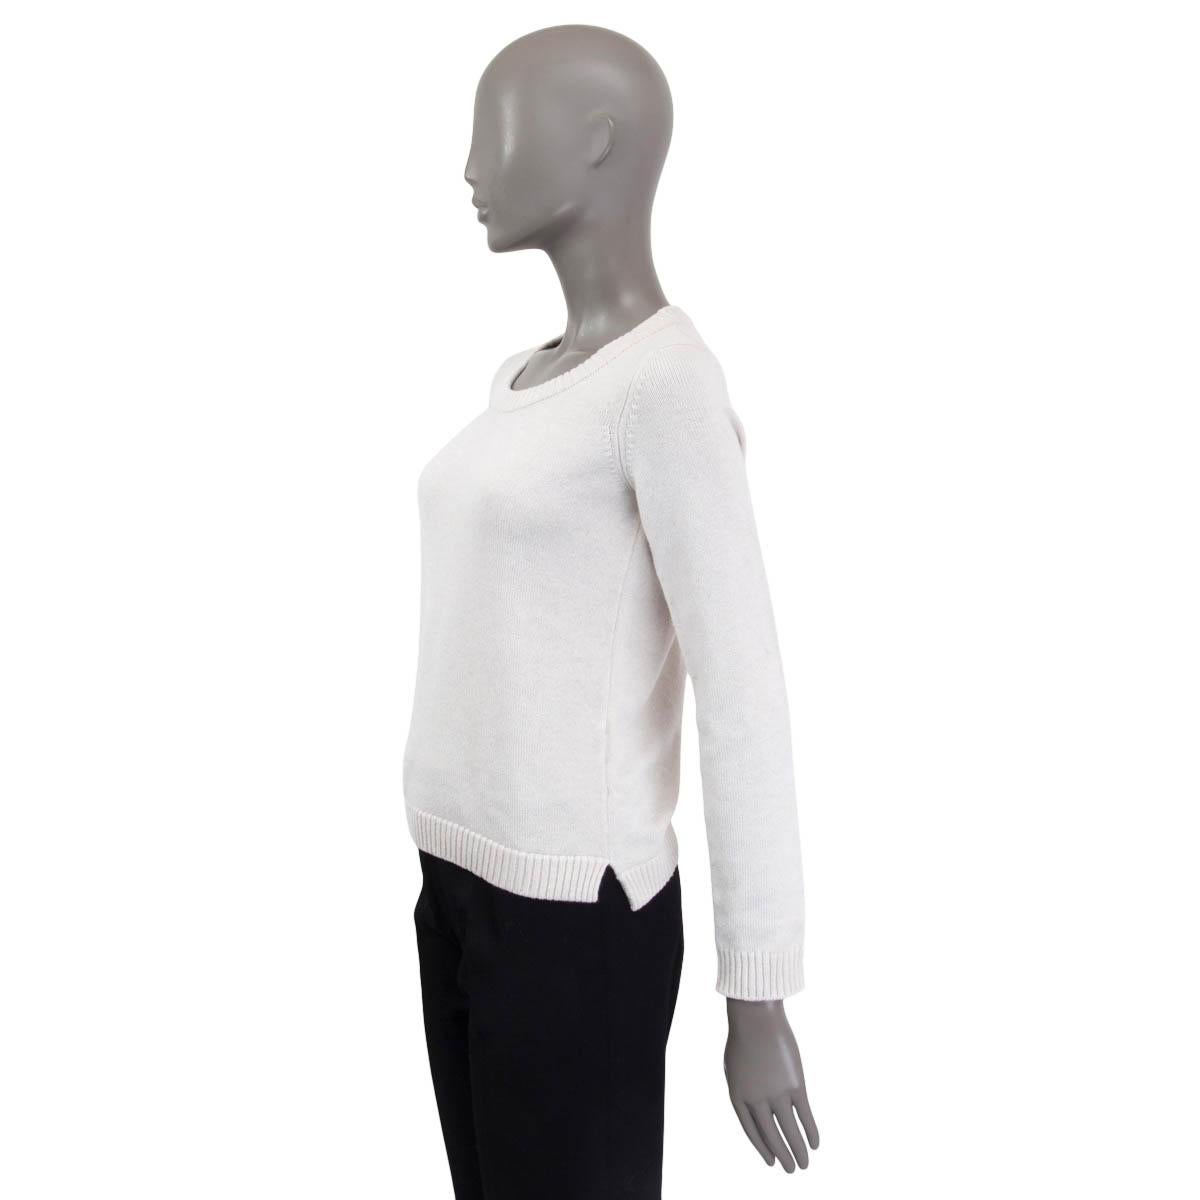 HERMES light grey cashmere ROUND NECK Sweater 36 XS In Excellent Condition For Sale In Zürich, CH